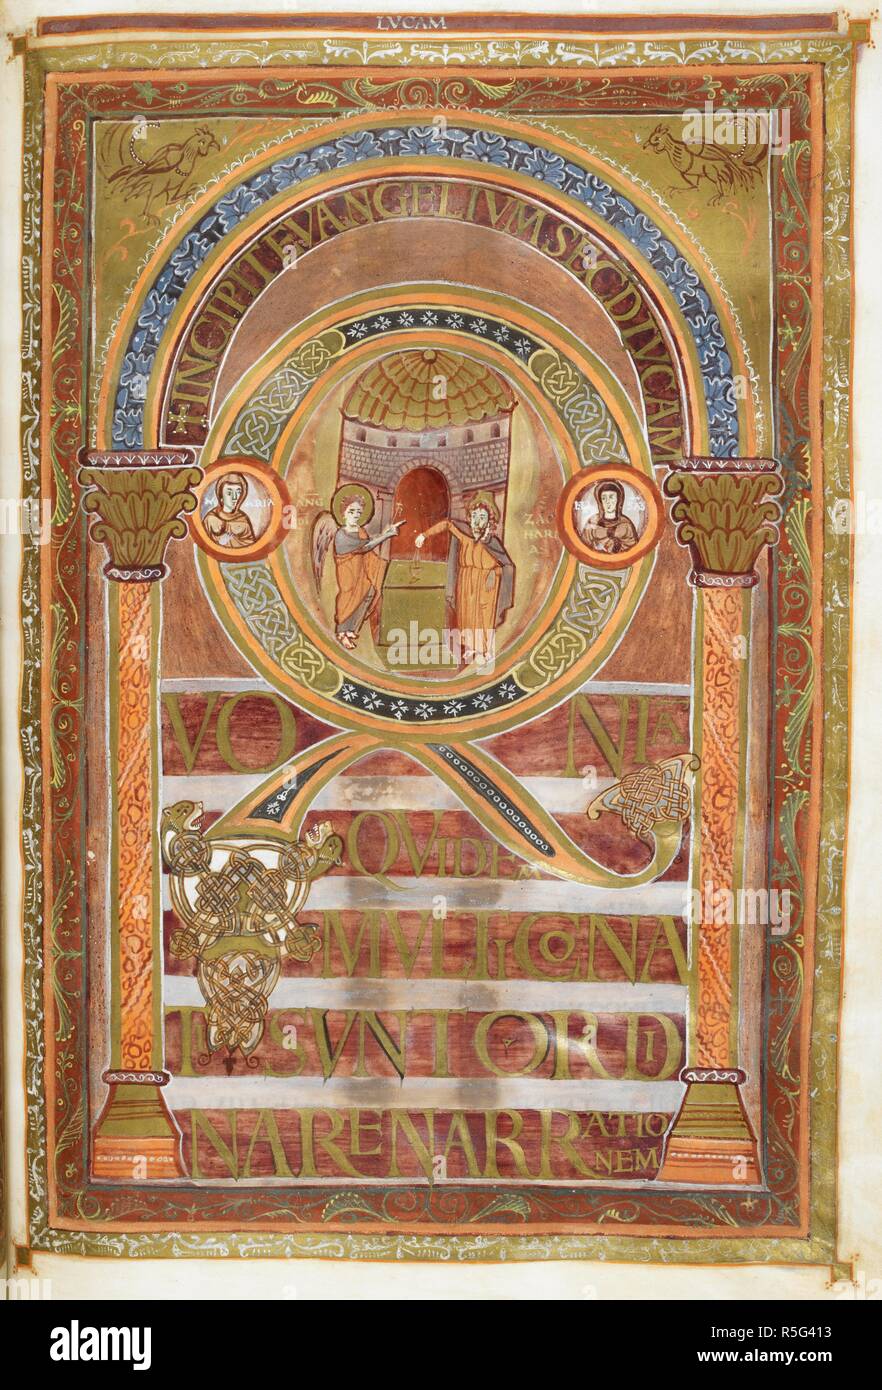 Incipit page of St Luke's Gospel. Text with initial 'Q', Zacharias is told by an angel of the forthcoming birth of John the Baptist. Harley Golden Gospels. Four Gospels (the 'Golden Gospels', 'Harley Golden Gospels'; 'Codex Aureus'), with canon tables. Carolingian Empire [Aachen?]; circa 800. Source: Harley 2788, f.109. Language: Latin. Stock Photo